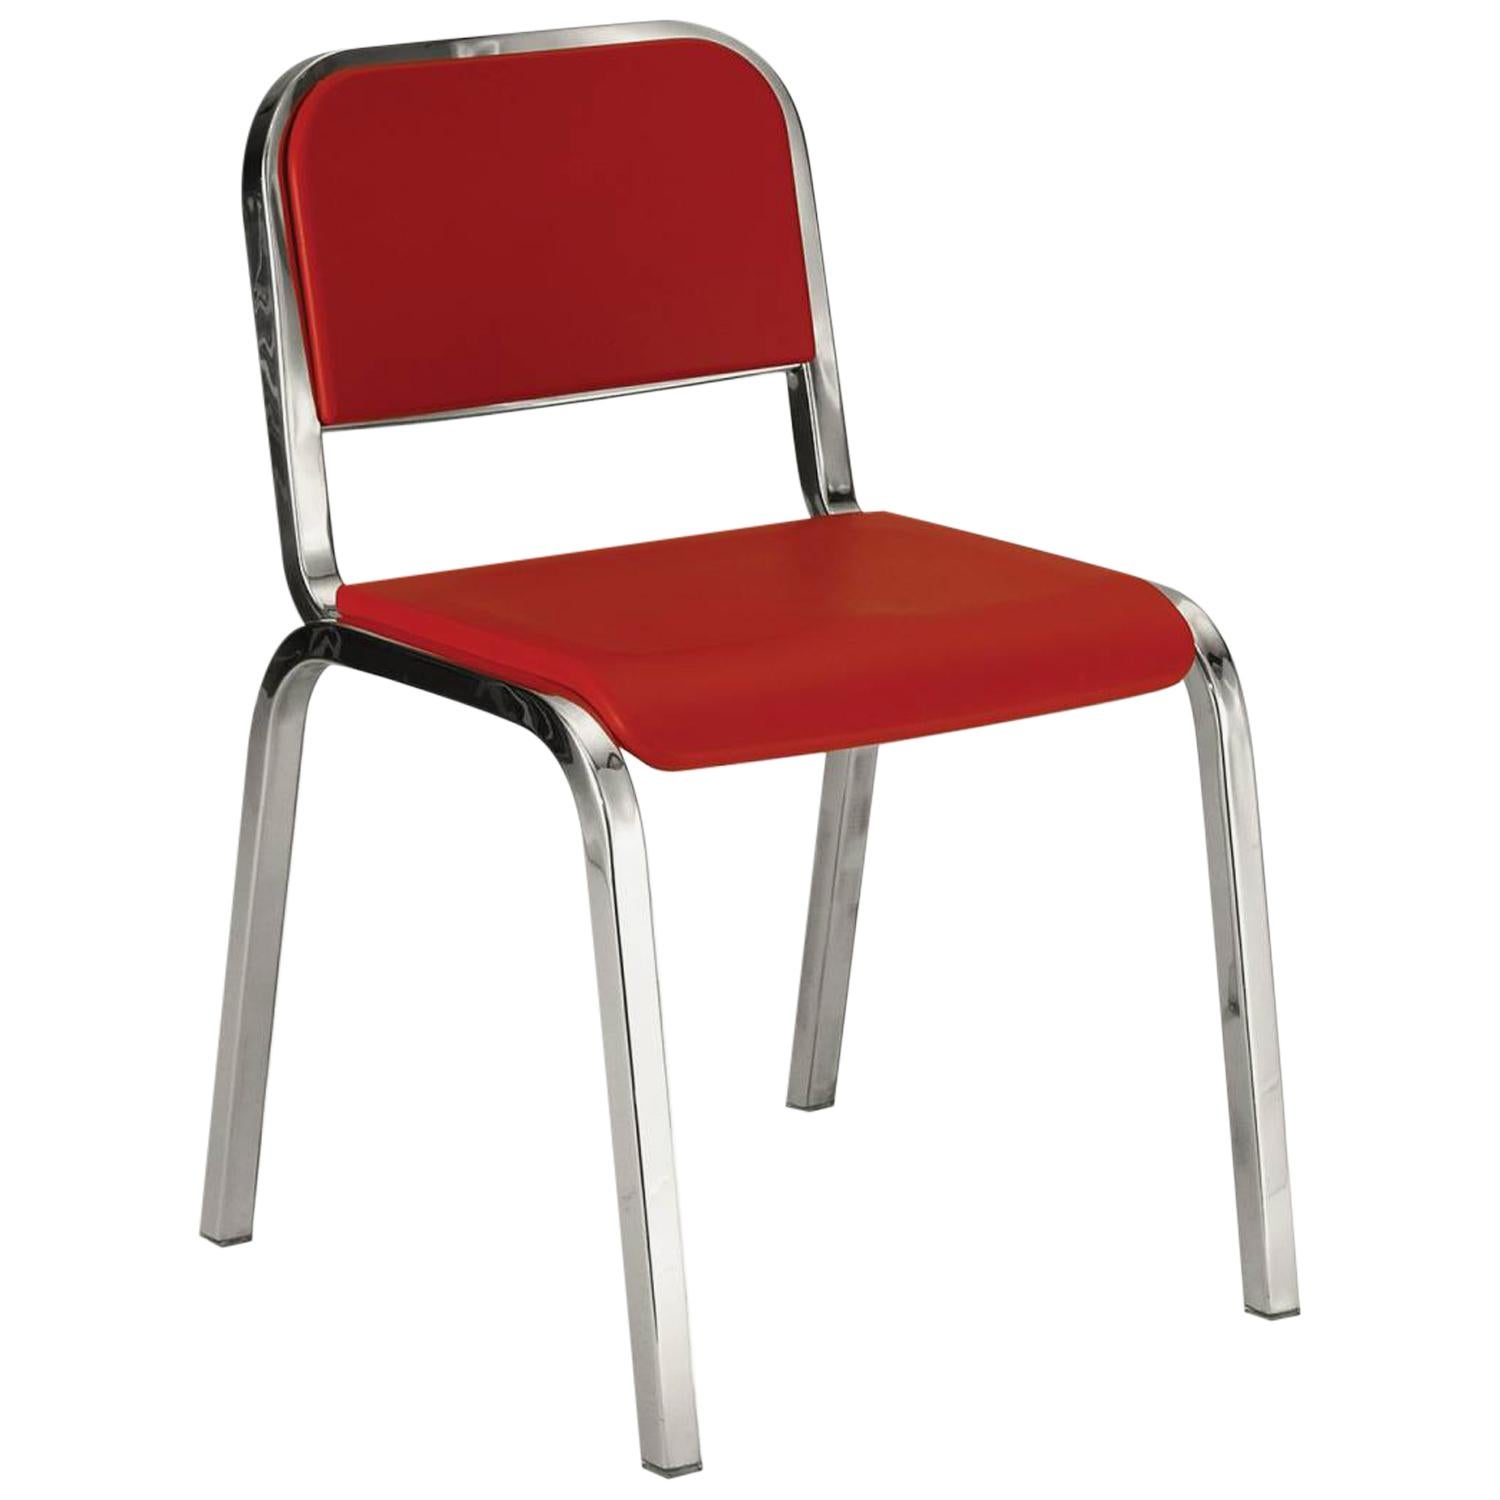 Emeco Nine-0 Chair in Polished Aluminium and Red by Ettore Sottsass